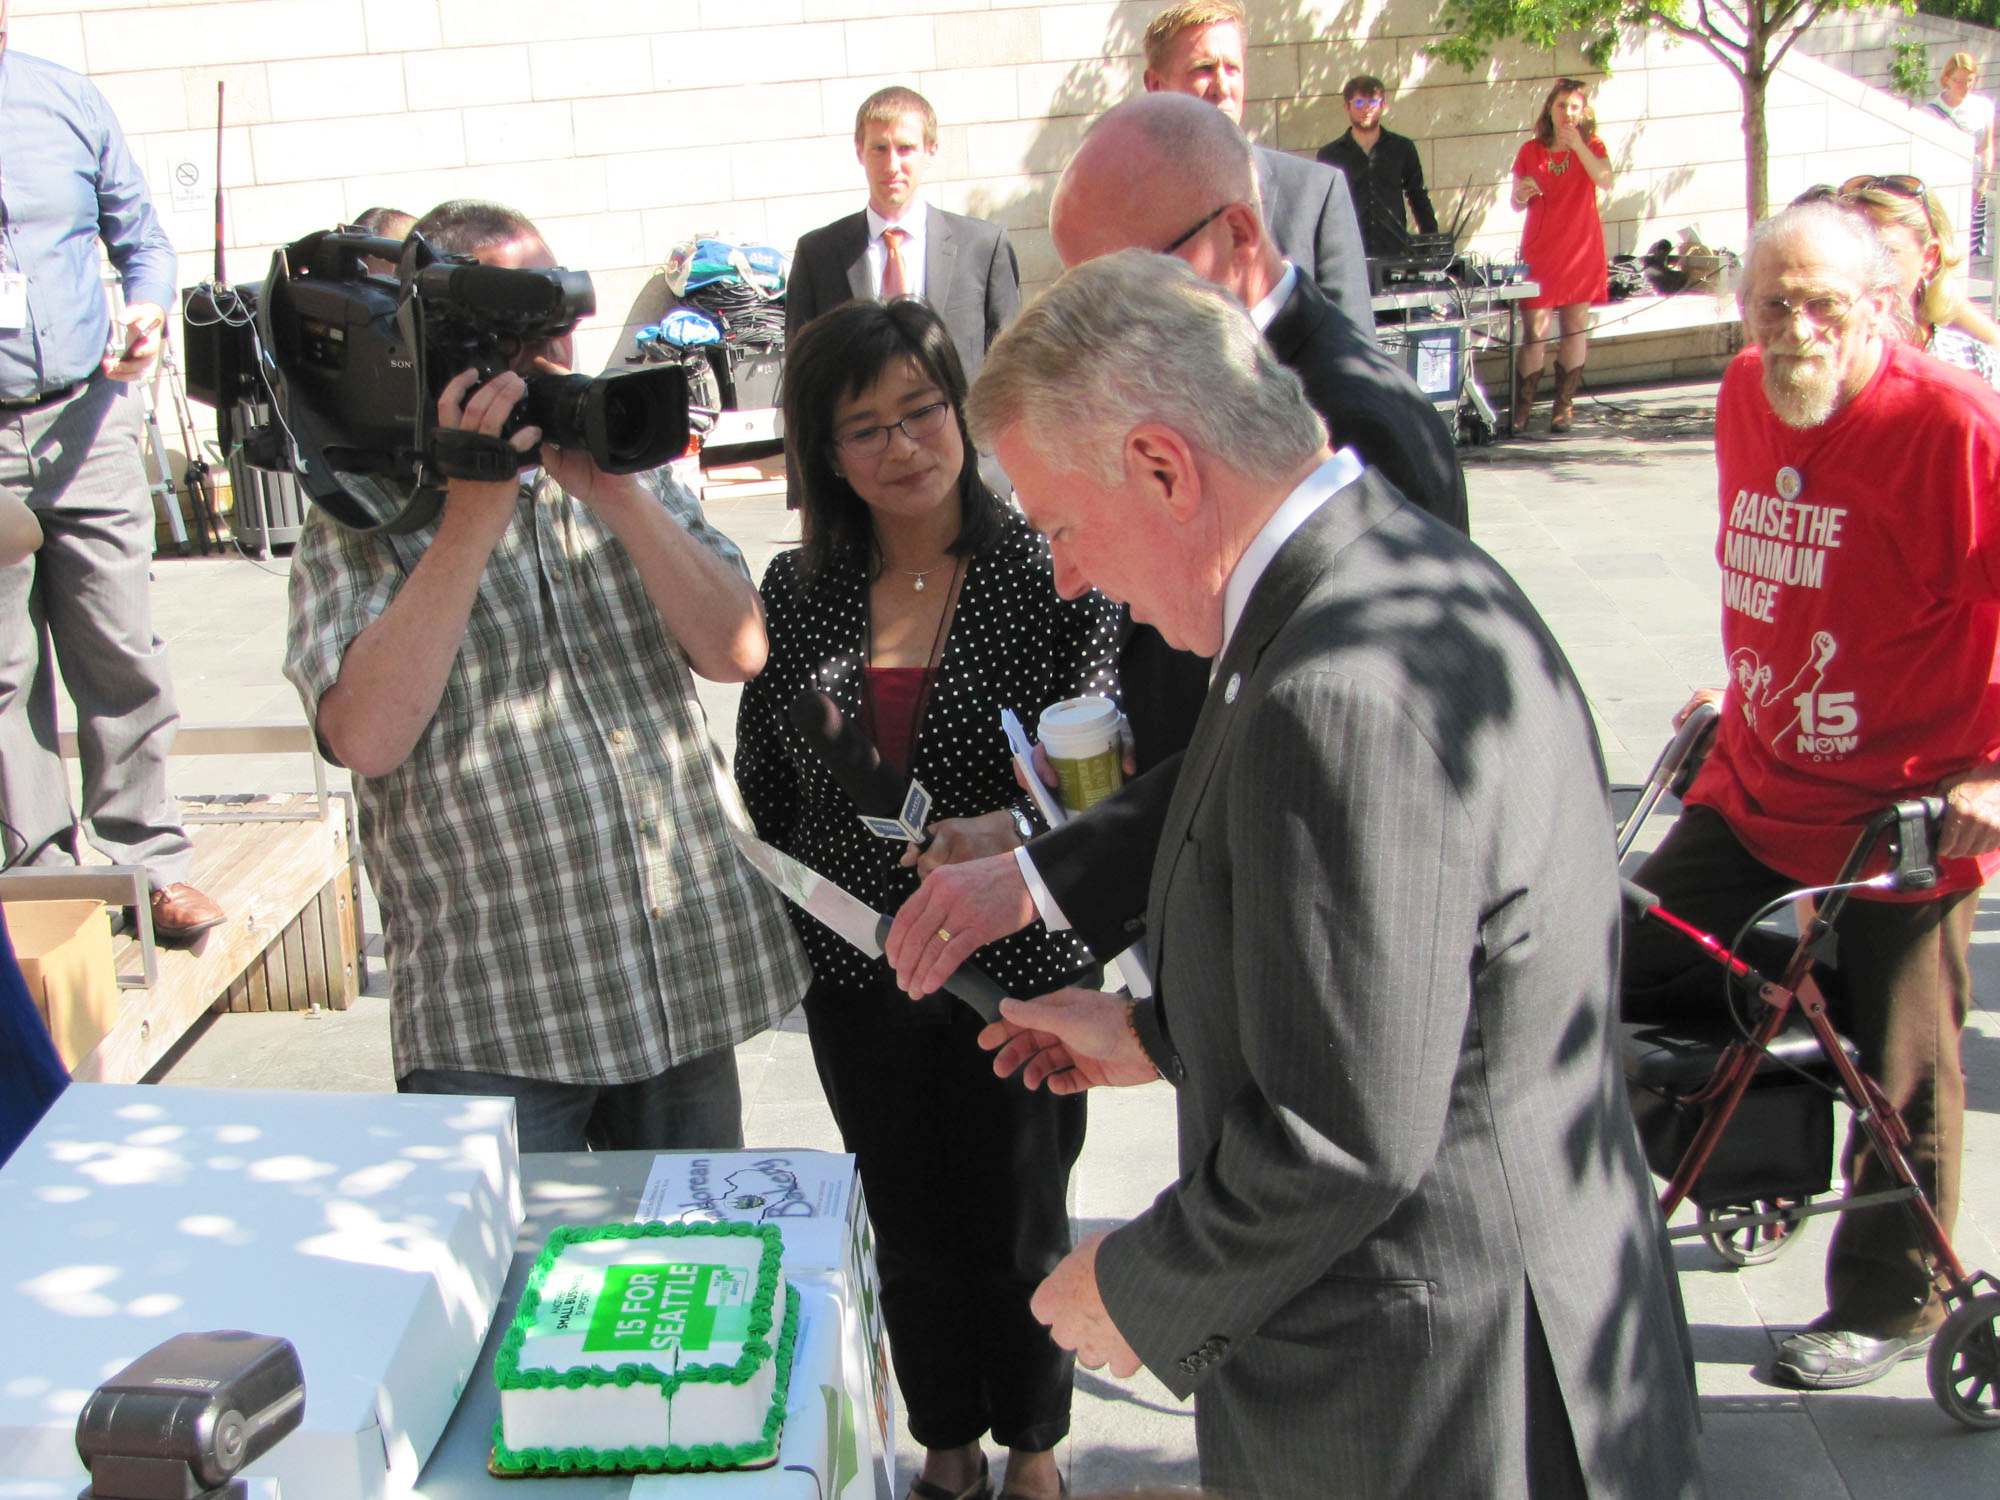 Back in June, Ed Murray cut into a cake celebrating Seattle's new minimum-wage bill. But how will the city enforce it?